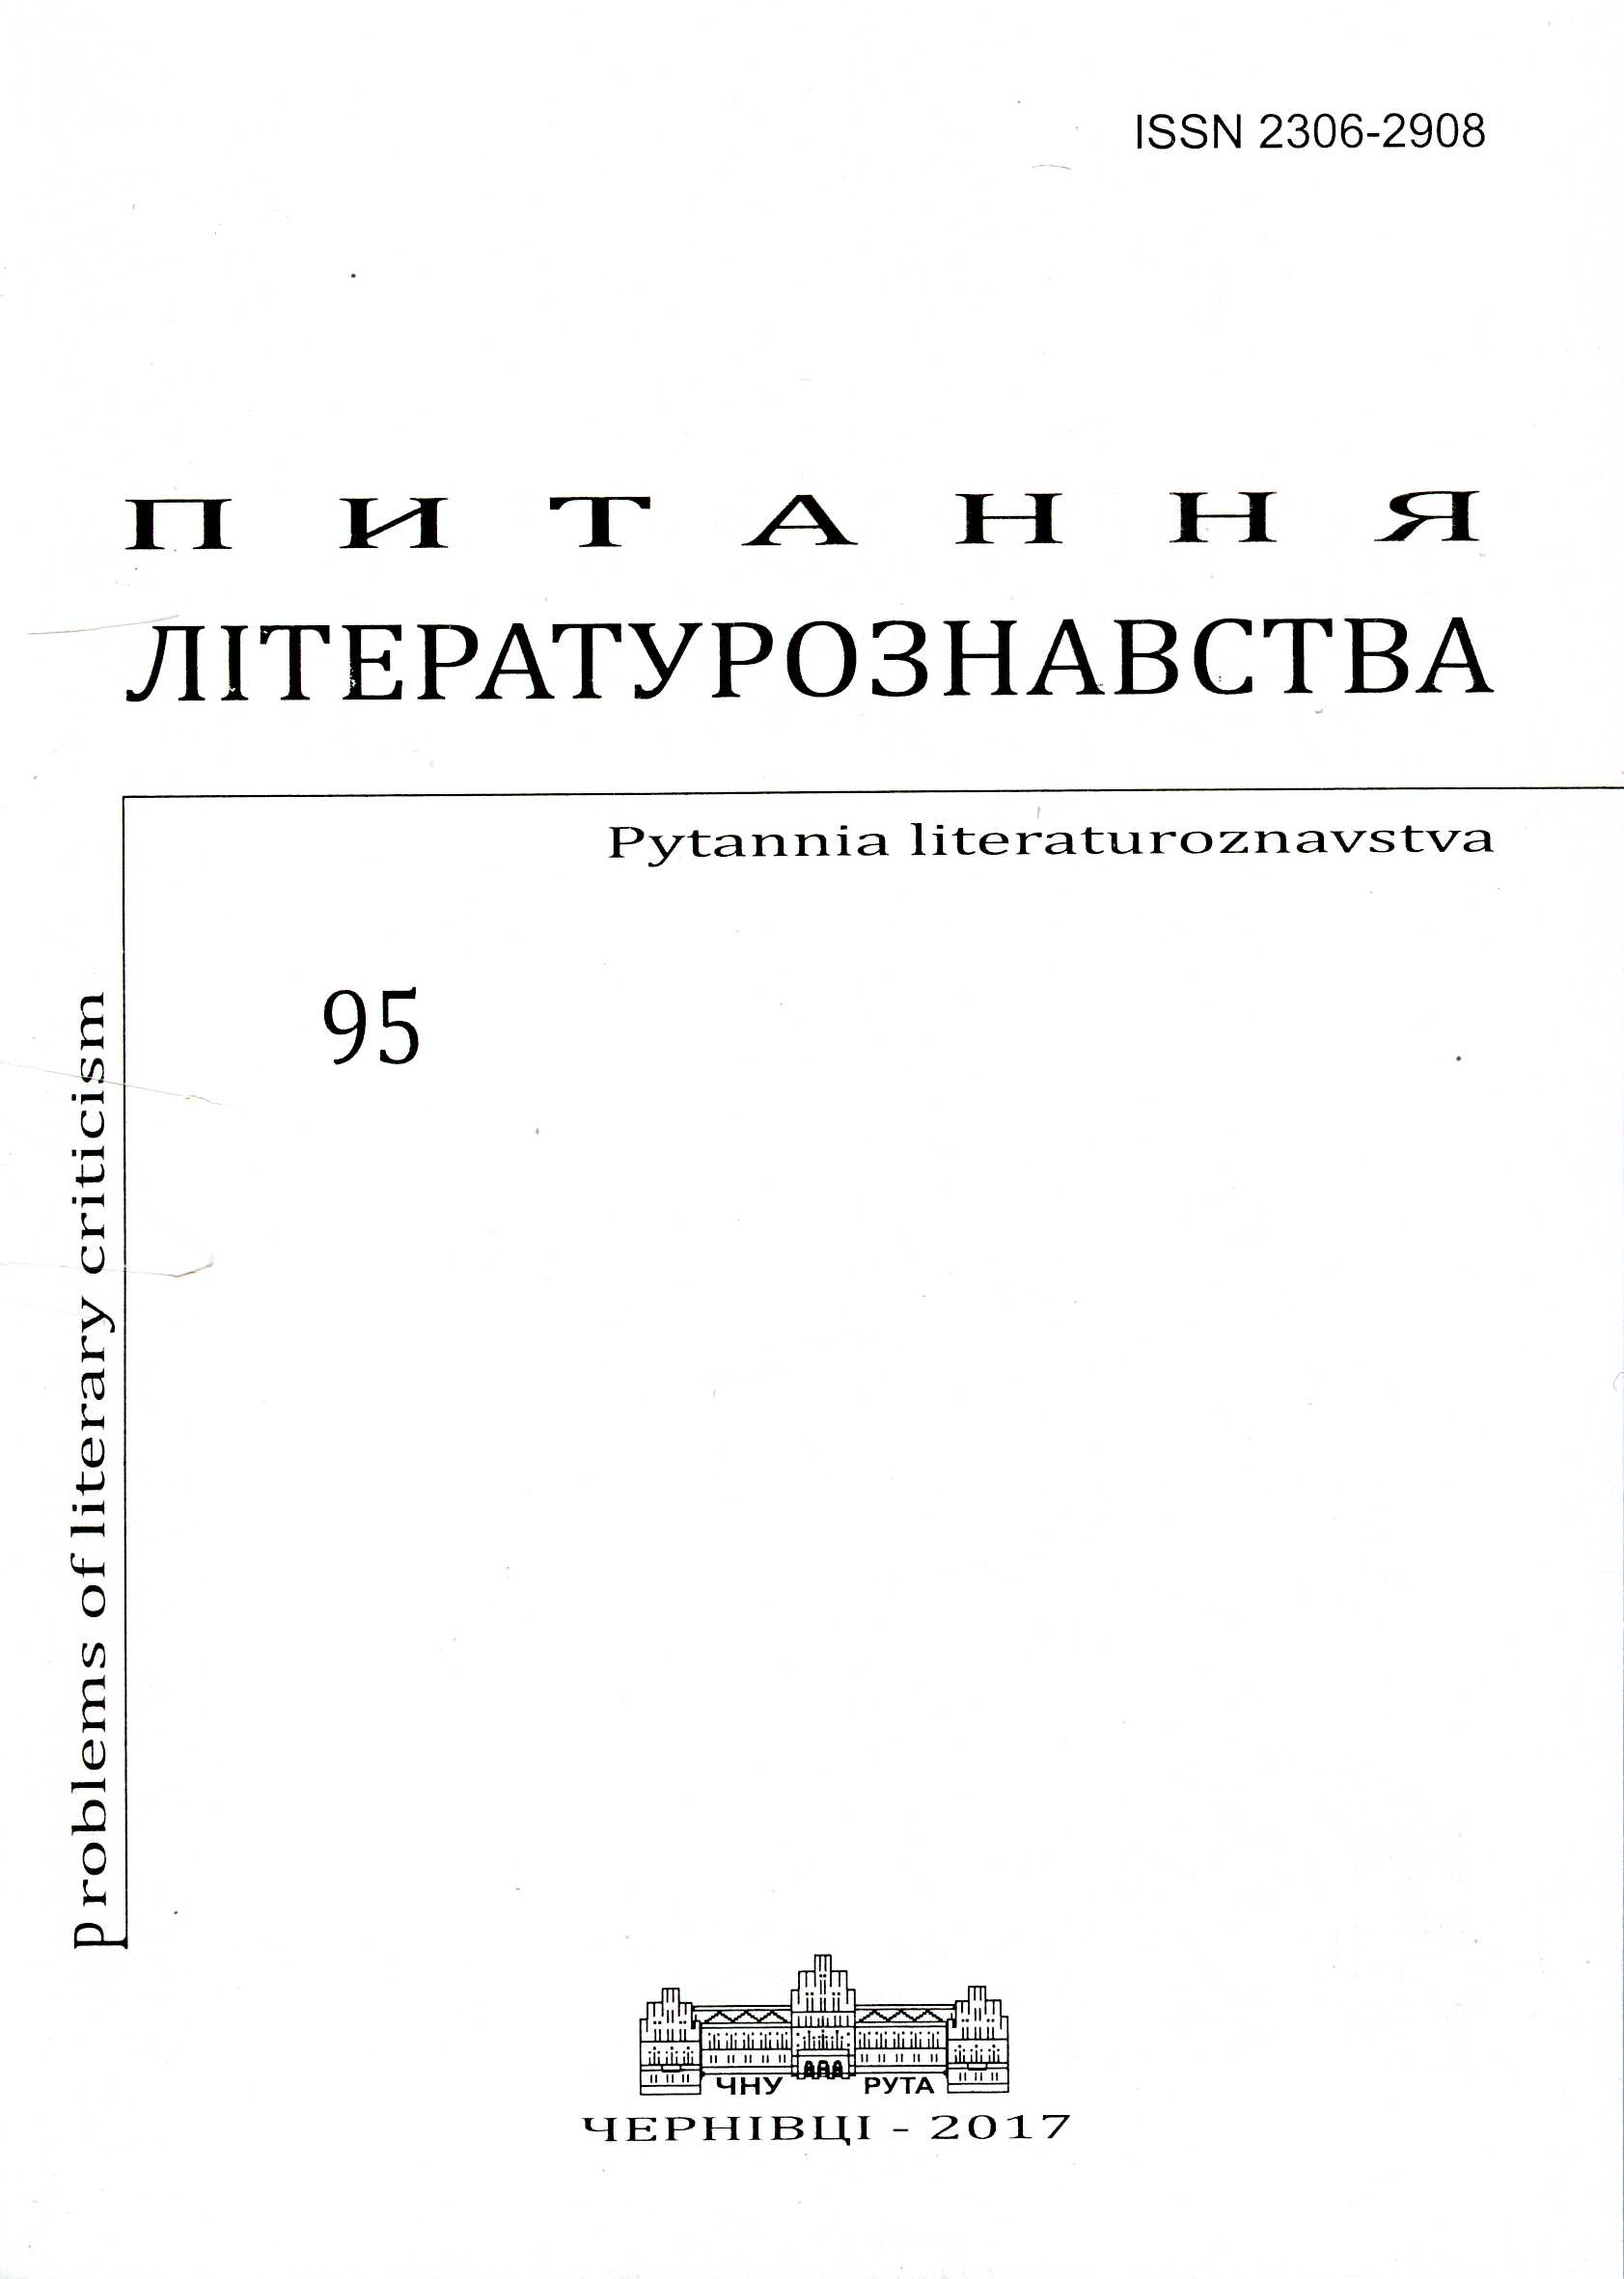 Functionality of Preface in the Integral Perception of Text (“Trans-Atlantic” by Witold Gombrowicz) Cover Image